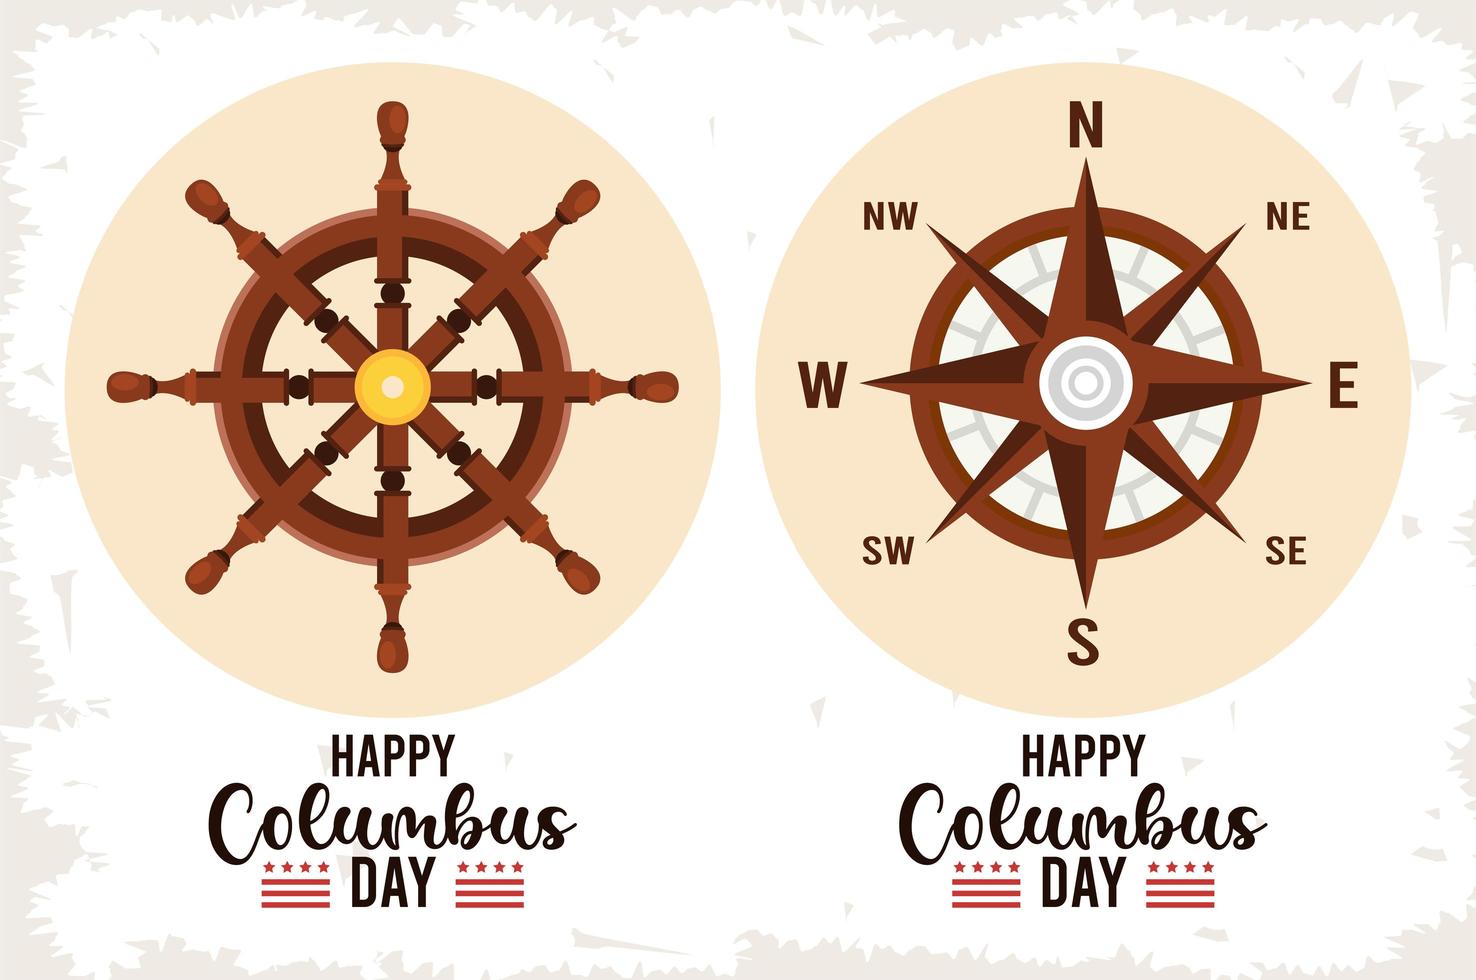 happy columbus day celebration with ship rudder and compass guide vector